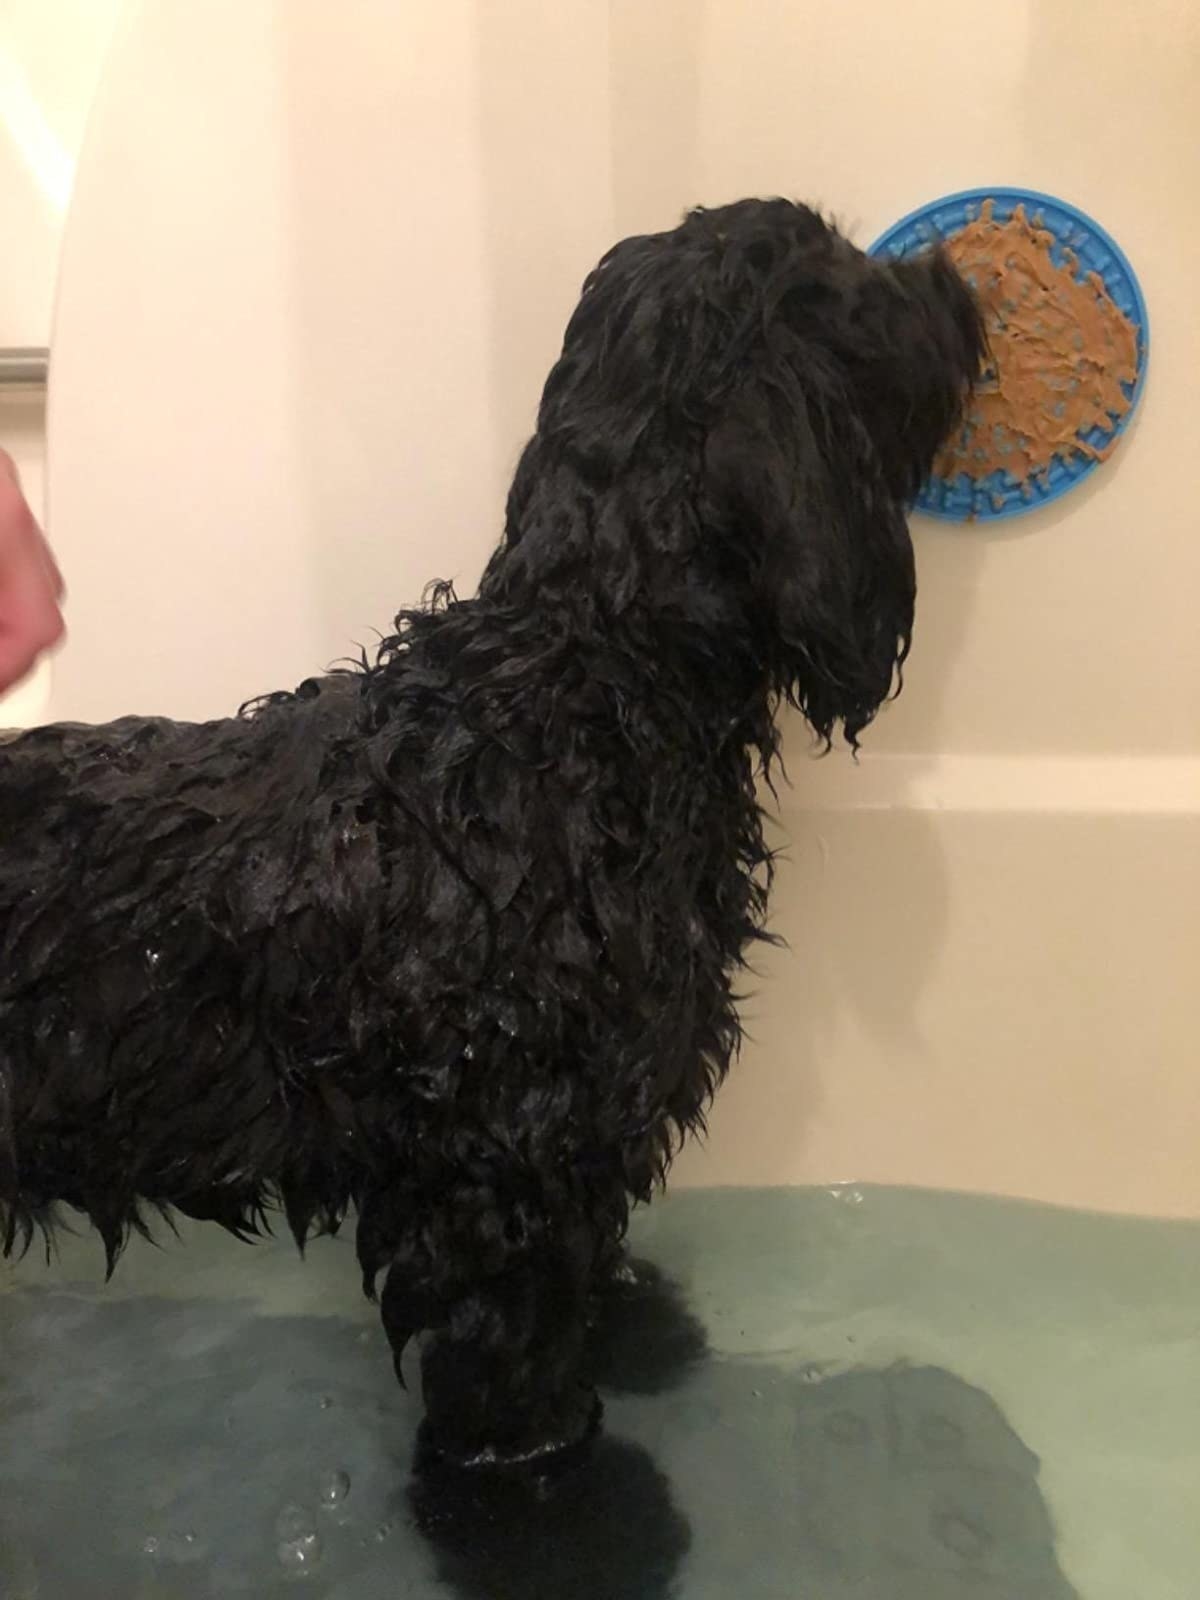 A reviewer&#x27;s dog licking peanut butter off of the lick pad during bath time